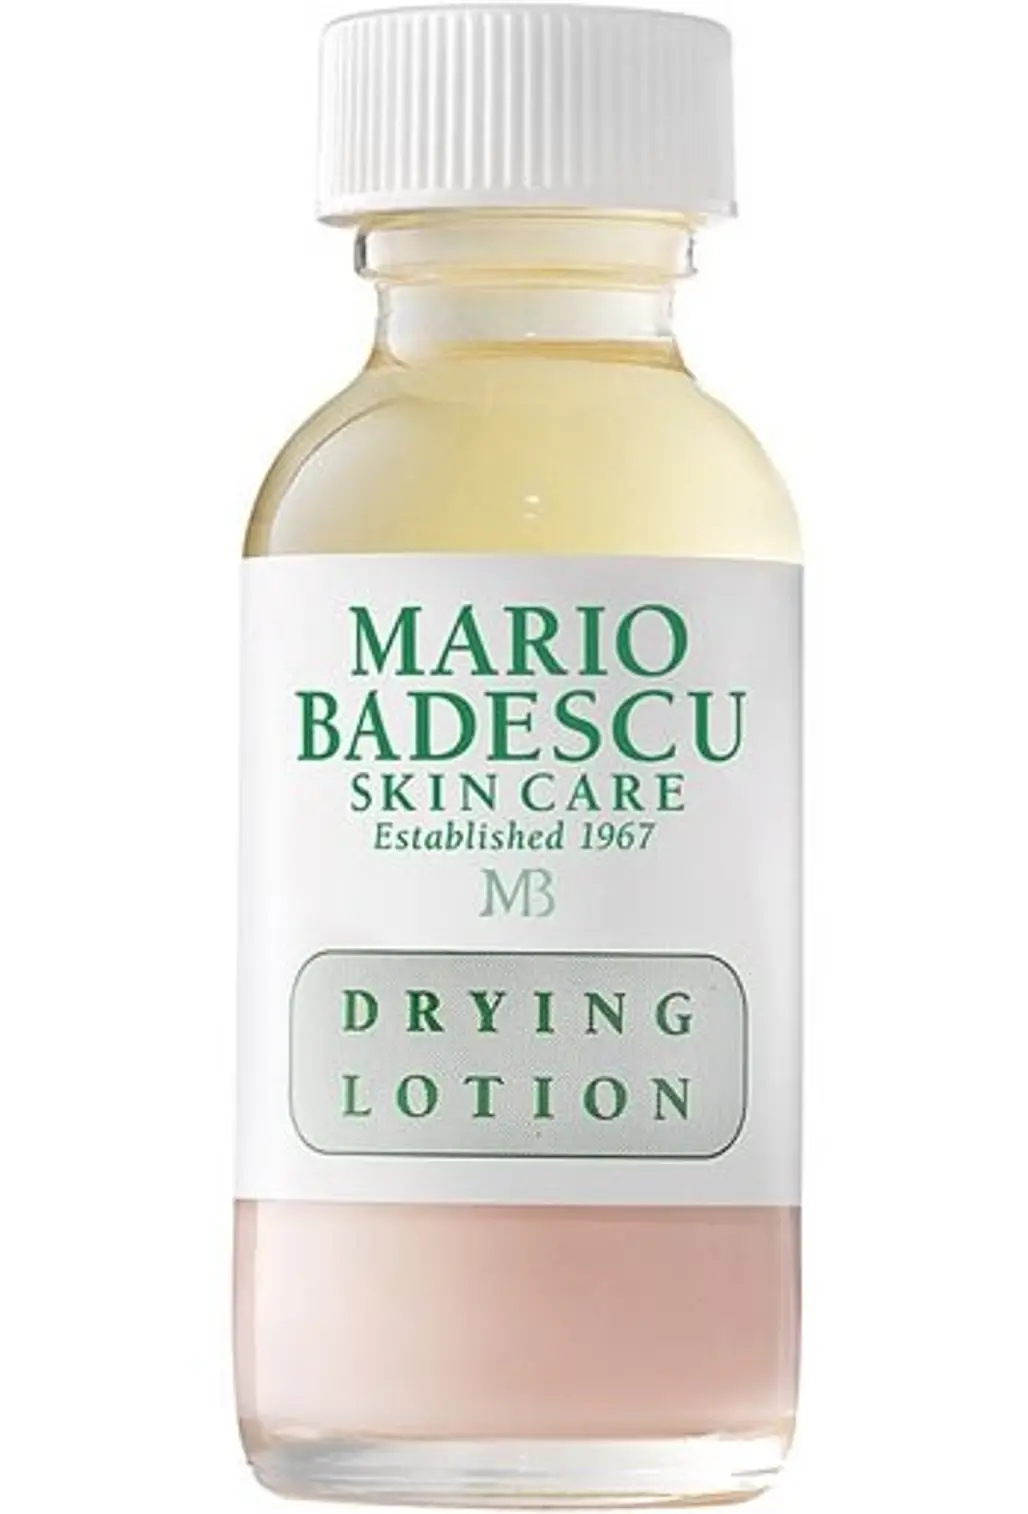 Mario Bedascu's Drying Lotion